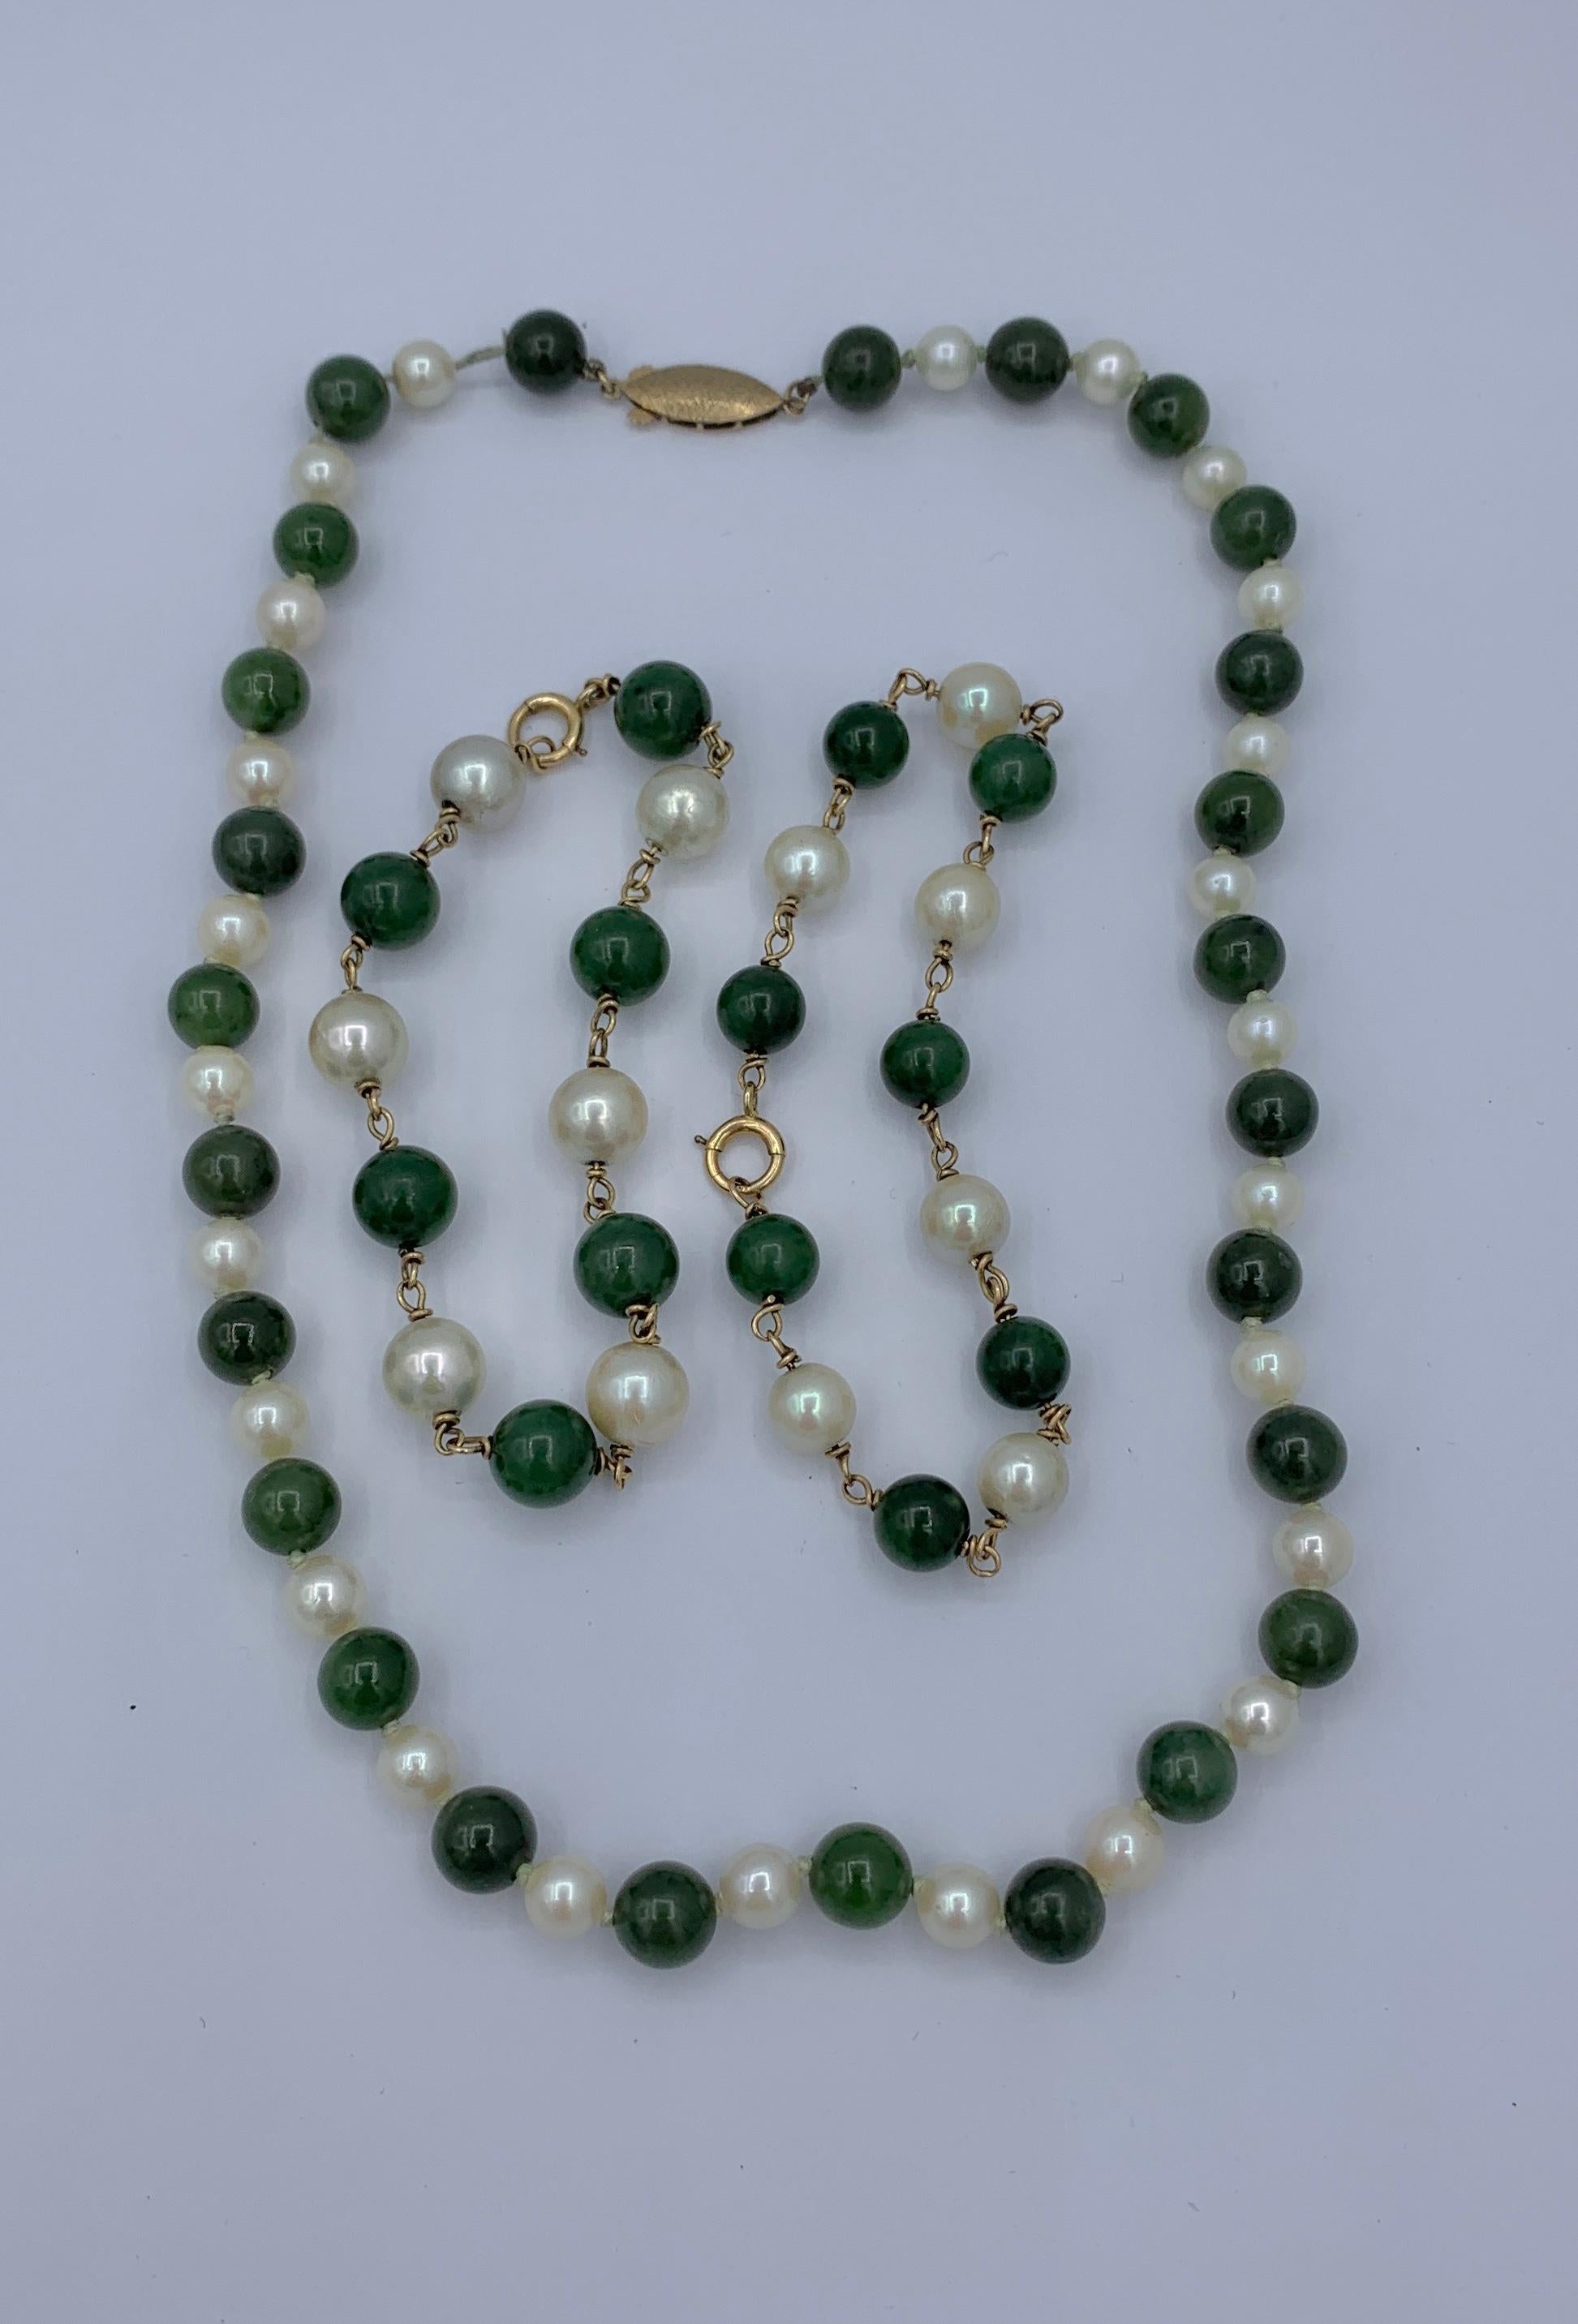 THIS IS A VERY BEAUTIFUL ART DECO JADE AND PEARL NECKLACE AND TWO MATCHING BRACELET SET IN 14 KARAT YELLOW GOLD.  THE STUNNING PIECES HAVE GORGEOUS JADE BEADS ALTERNATING WITH BEAUTIFUL CREAMY WHITE PEARLS AND SET WITH 14 KARAT YELLOW GOLD.  THE